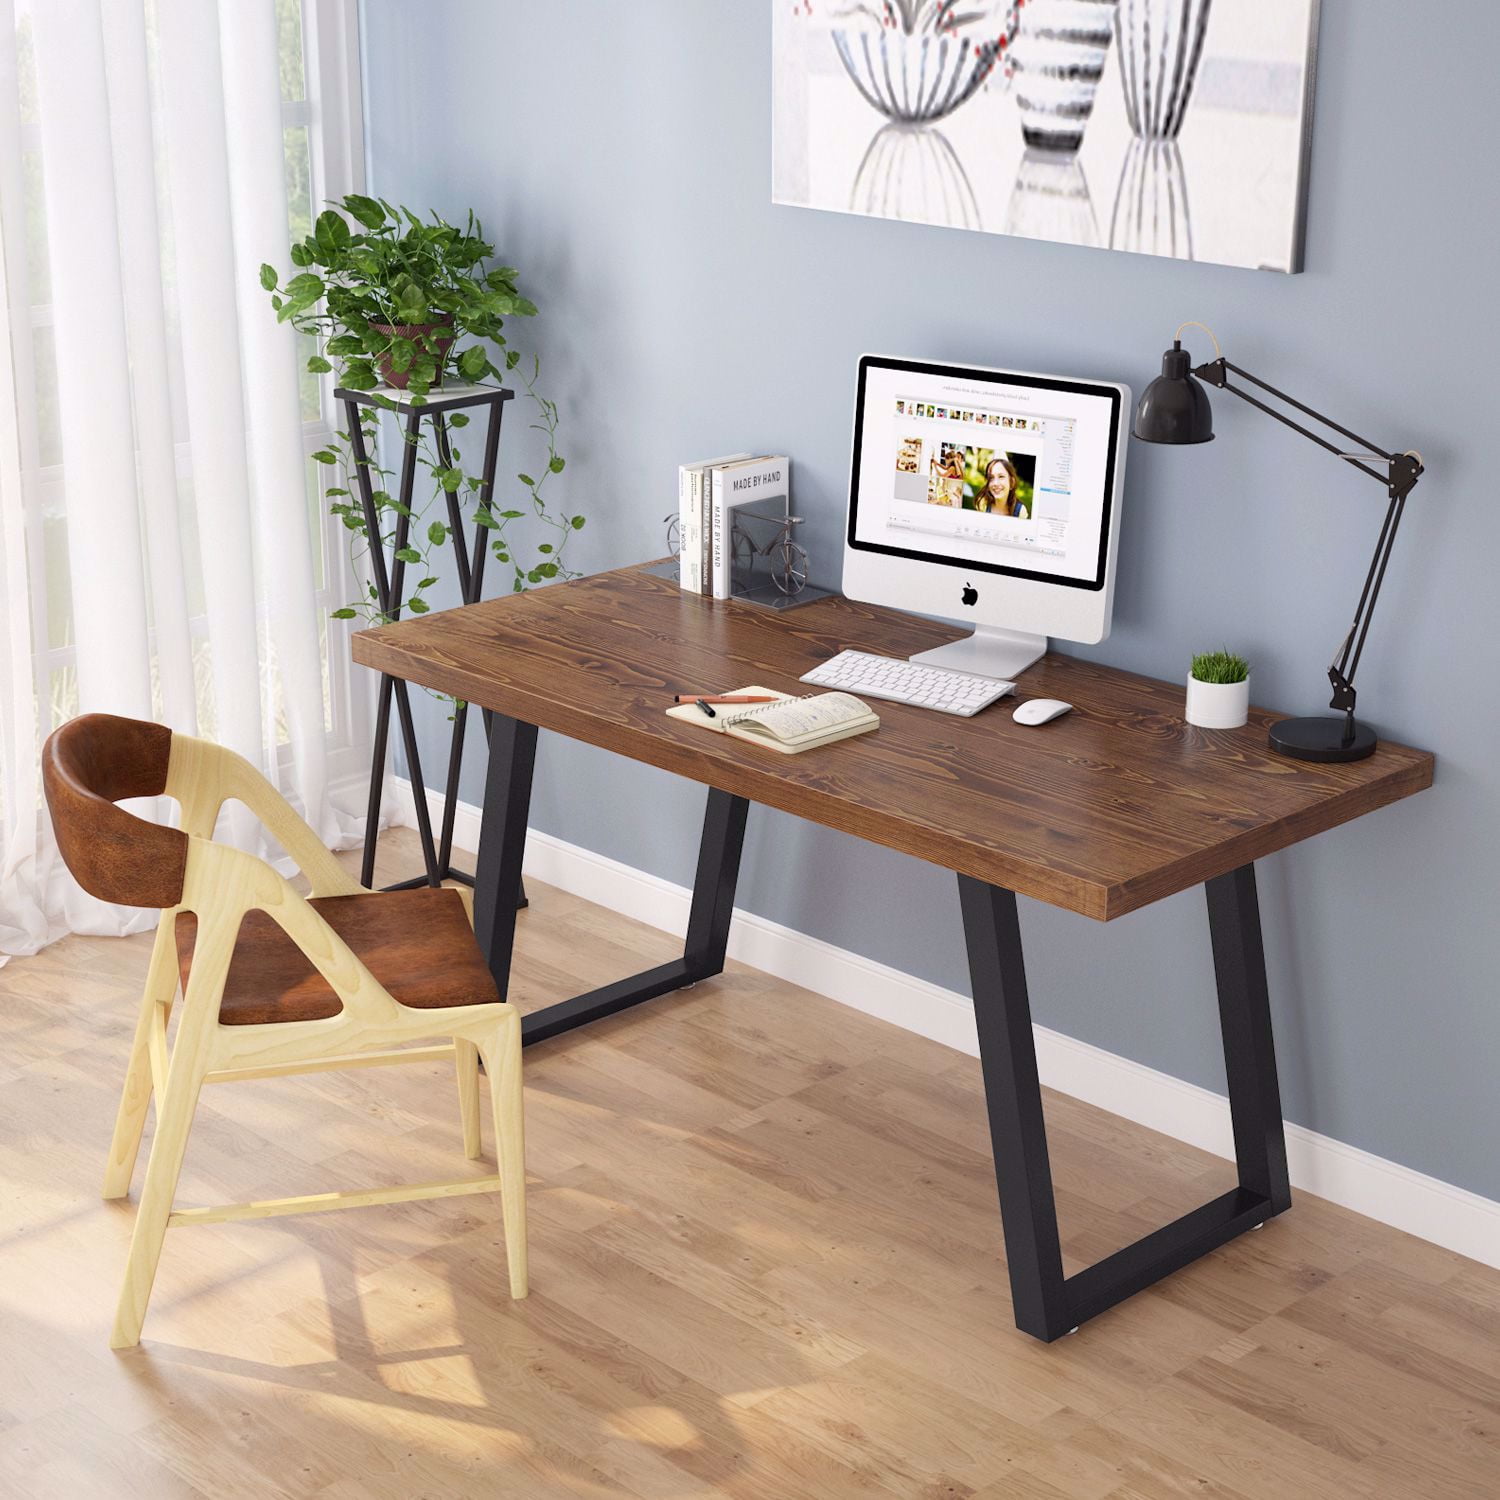 Tribesigns 55" Rustic Computer Desk, Solid Wood Industrial Desk with